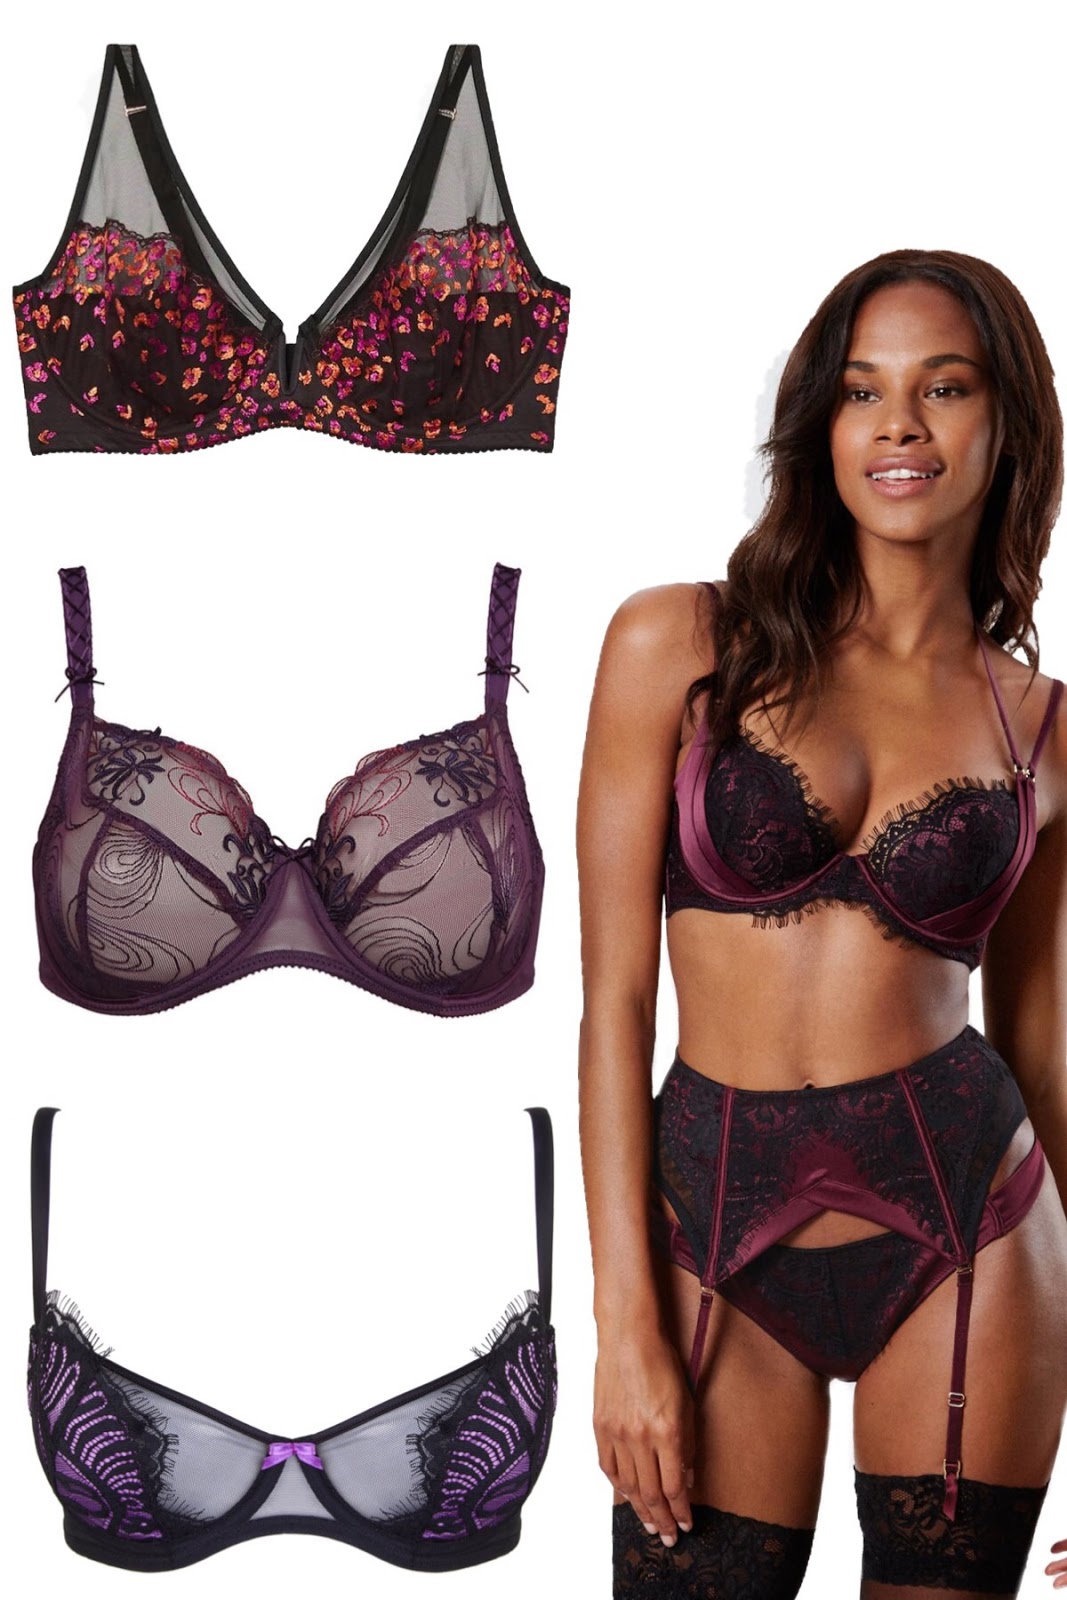 Winter Lingerie Inspiration For Every Bust